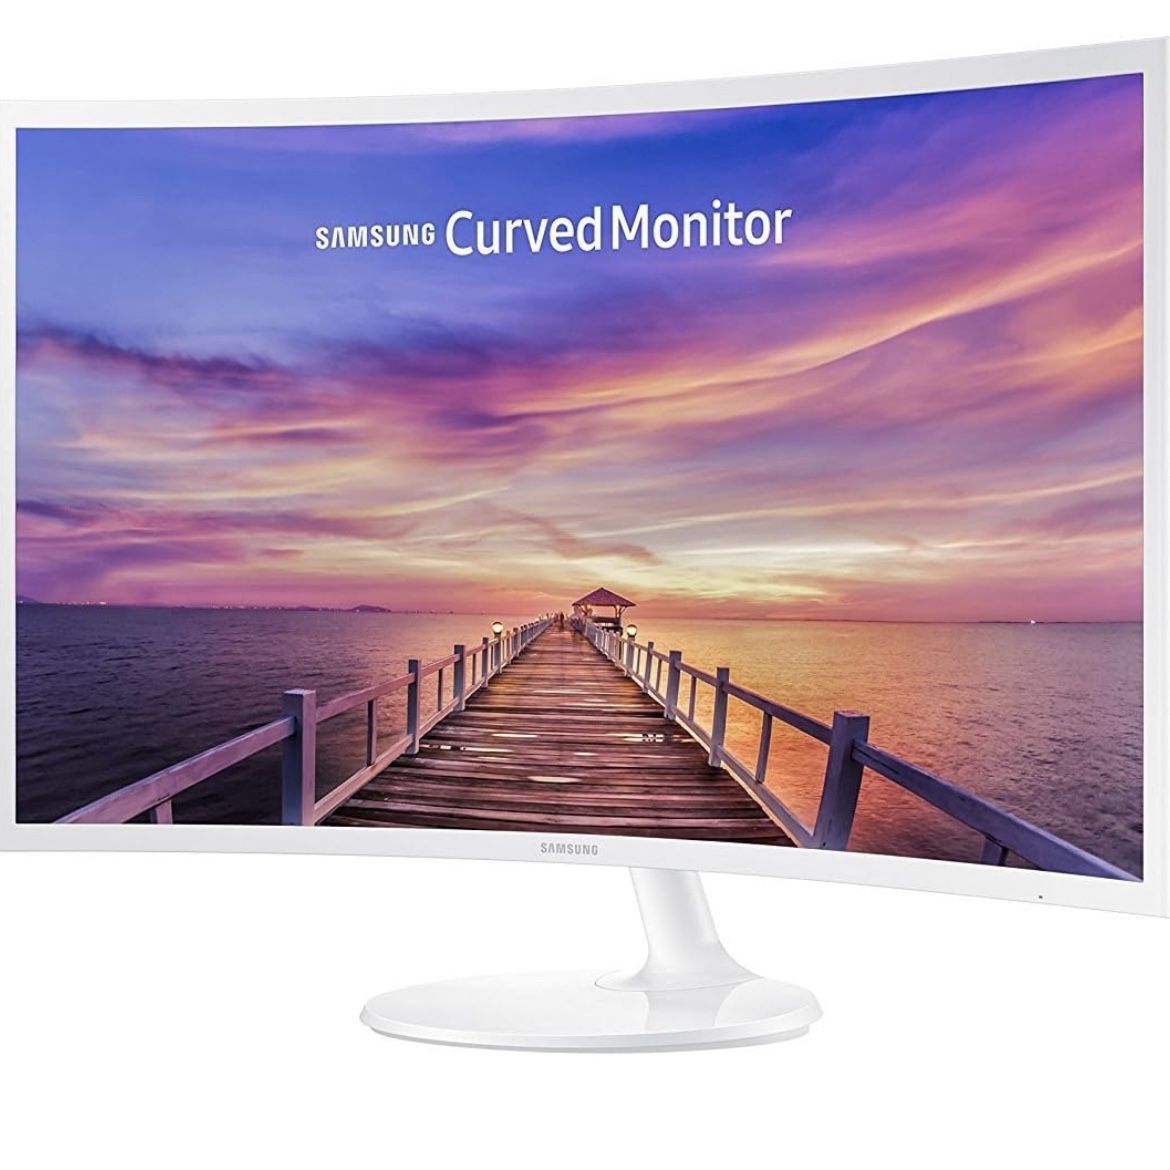 SAMSUNG 32-Inch Widescreen FHD Curved LED Monitor, 1920x1080 Resolution, 16:9 Aspect Ratio, 4ms Response Time, 178 Degrees Viewing Angles, 3,000:1 Sta